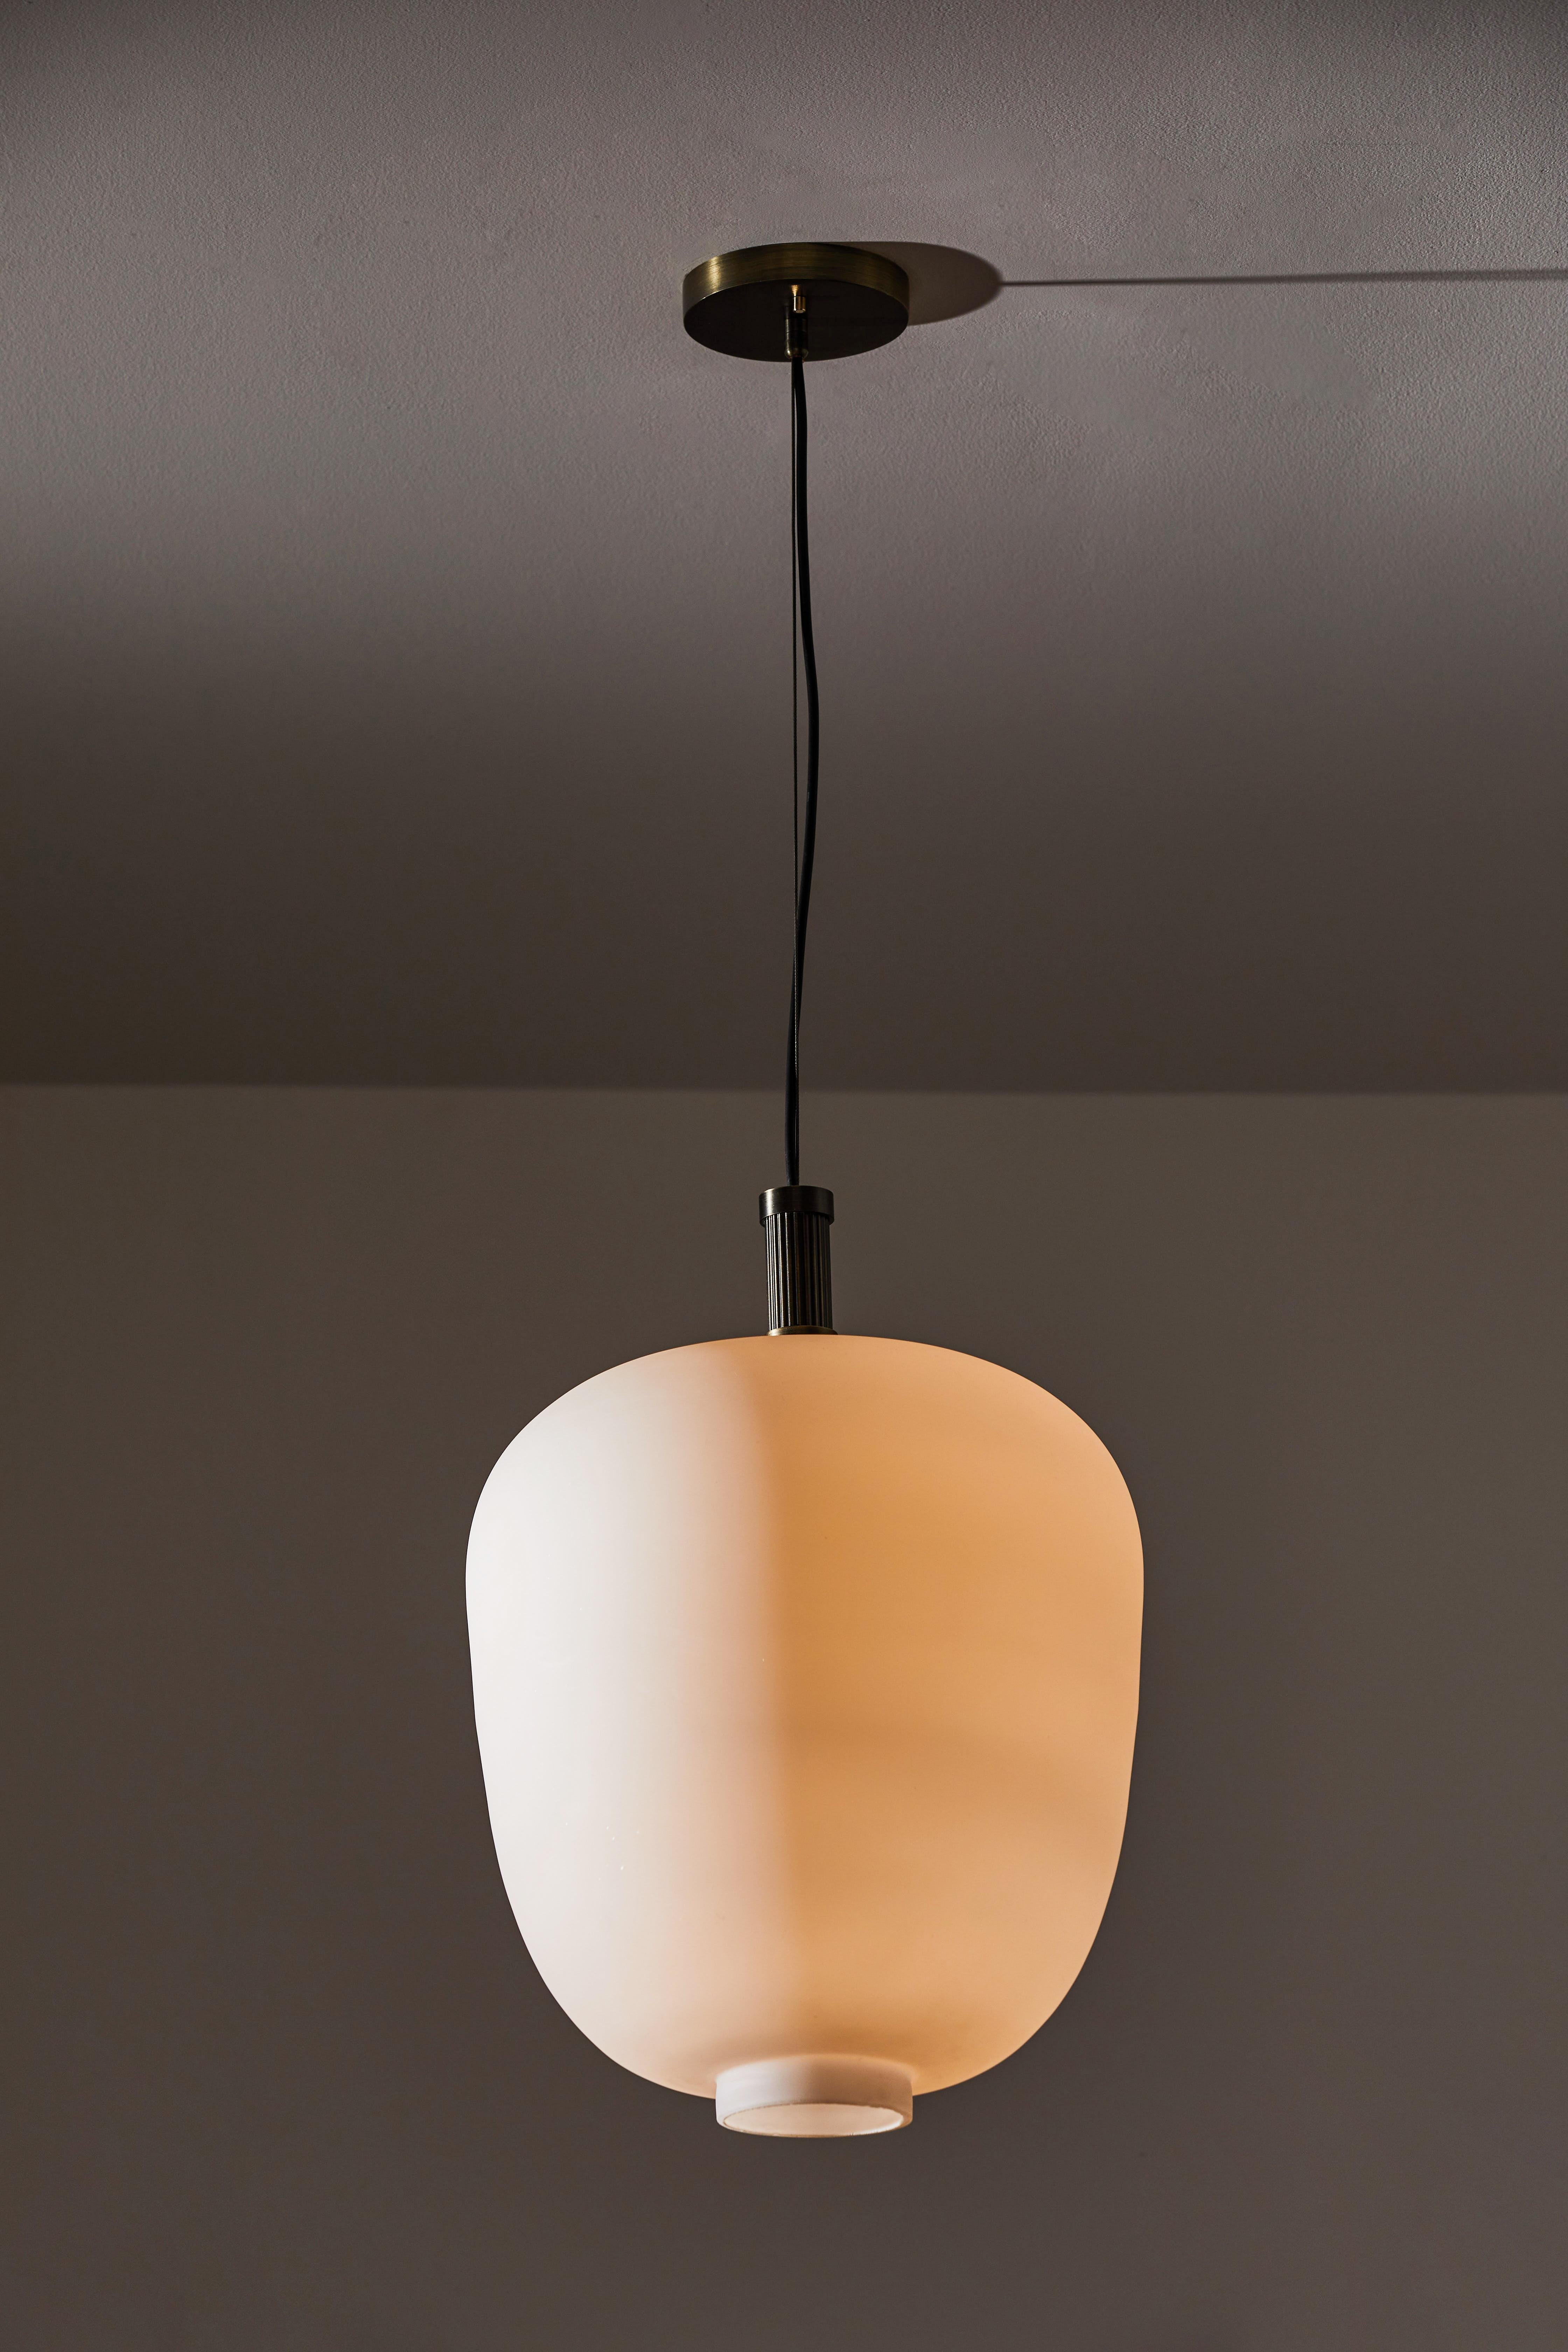 Two suspension light by Vilhelm Lauritzen. Designed and manufactured in Denmark, circa 1960s. Brushed satin glass diffuser, custom brass ceiling plate. Rewired for U.S. standards. We recommend one E27 100w maximum bulb per fixture. Light bulbs not